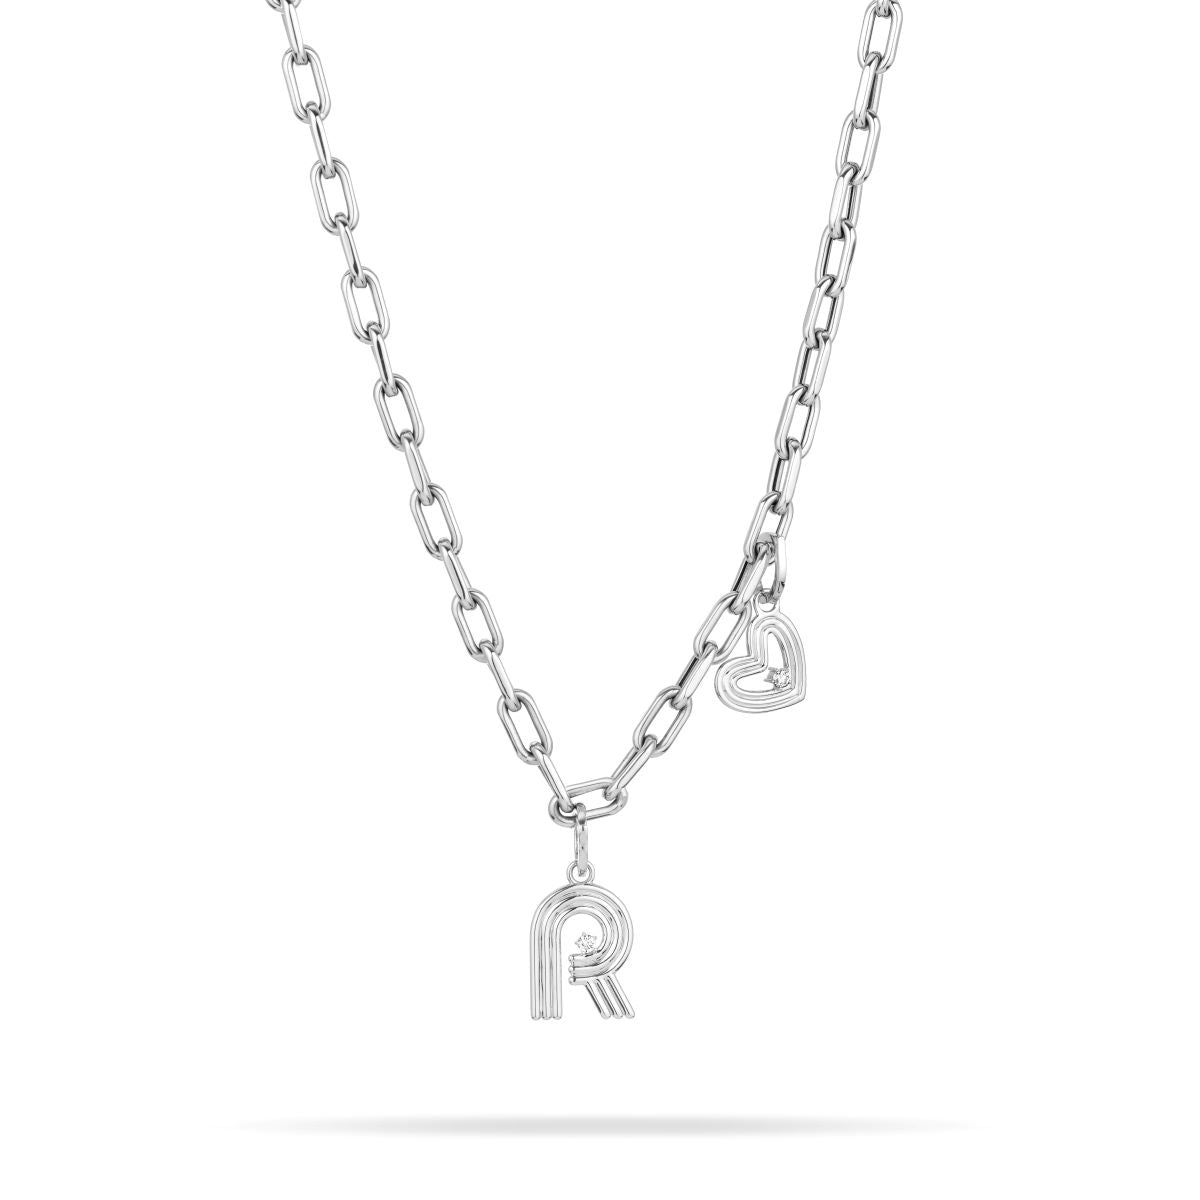 5.3mm Groovy Italian Chain Initial Heart Necklace in Sterling Silver